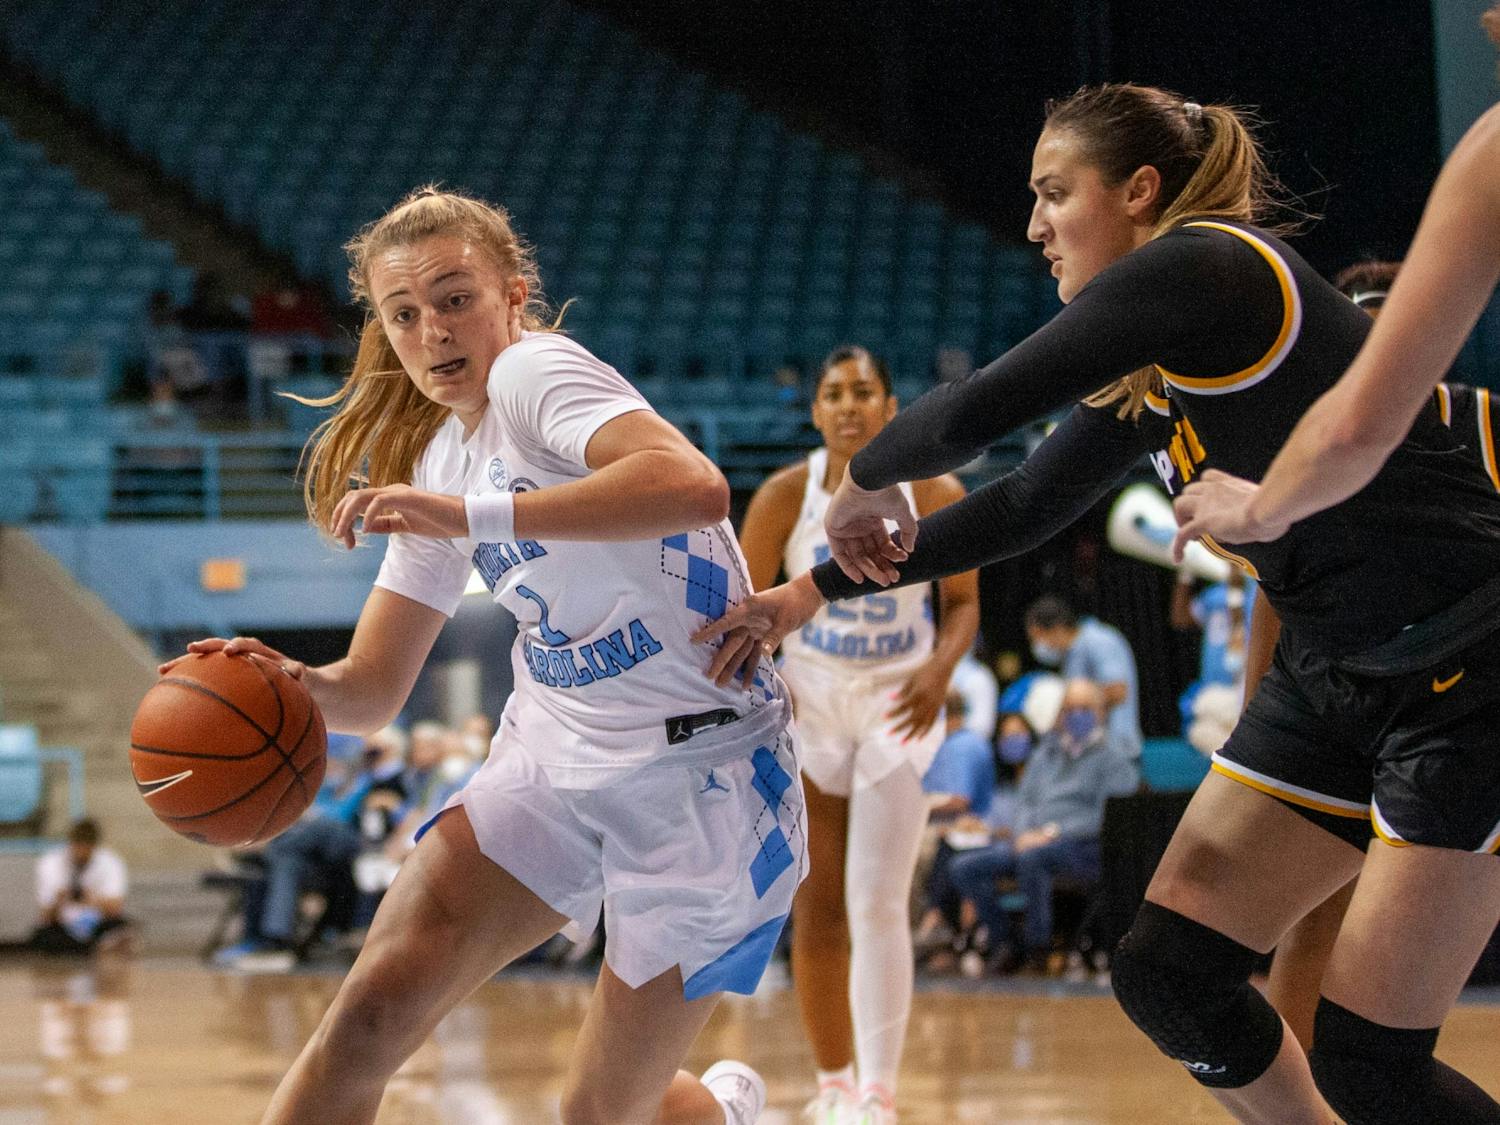 UNC graduate guard Carlie Littlefield (2) attempts to shoot the ball during the game against Appalachian State at Carmichael Arena on Nov. 17.